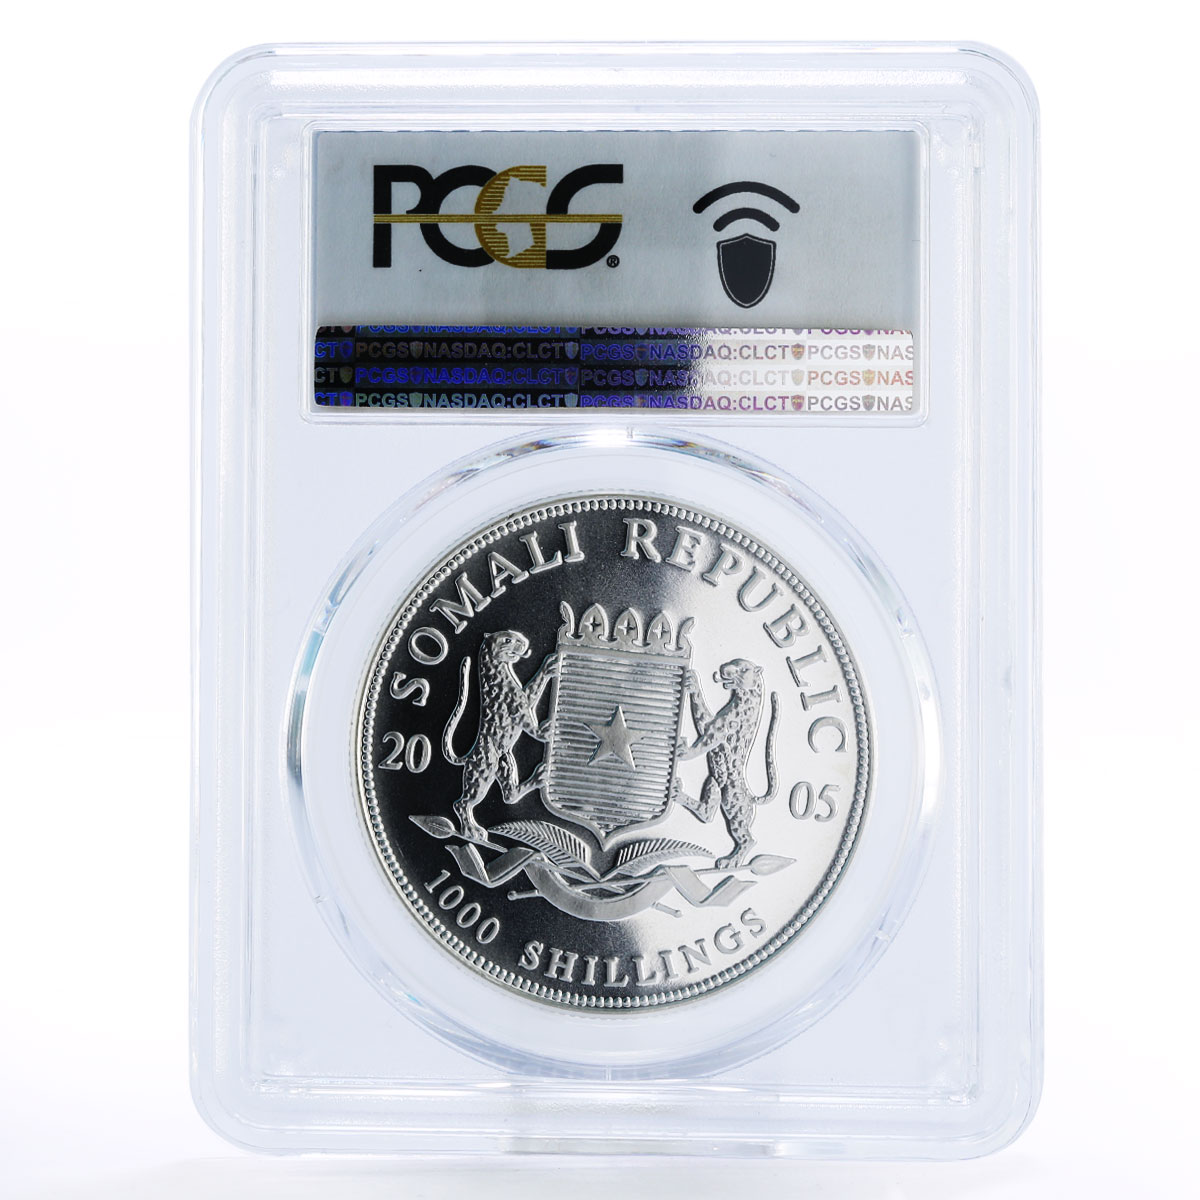 Somali 1000 shillings Wildlife Elephant MS67 PCGS colored silver coin 2005